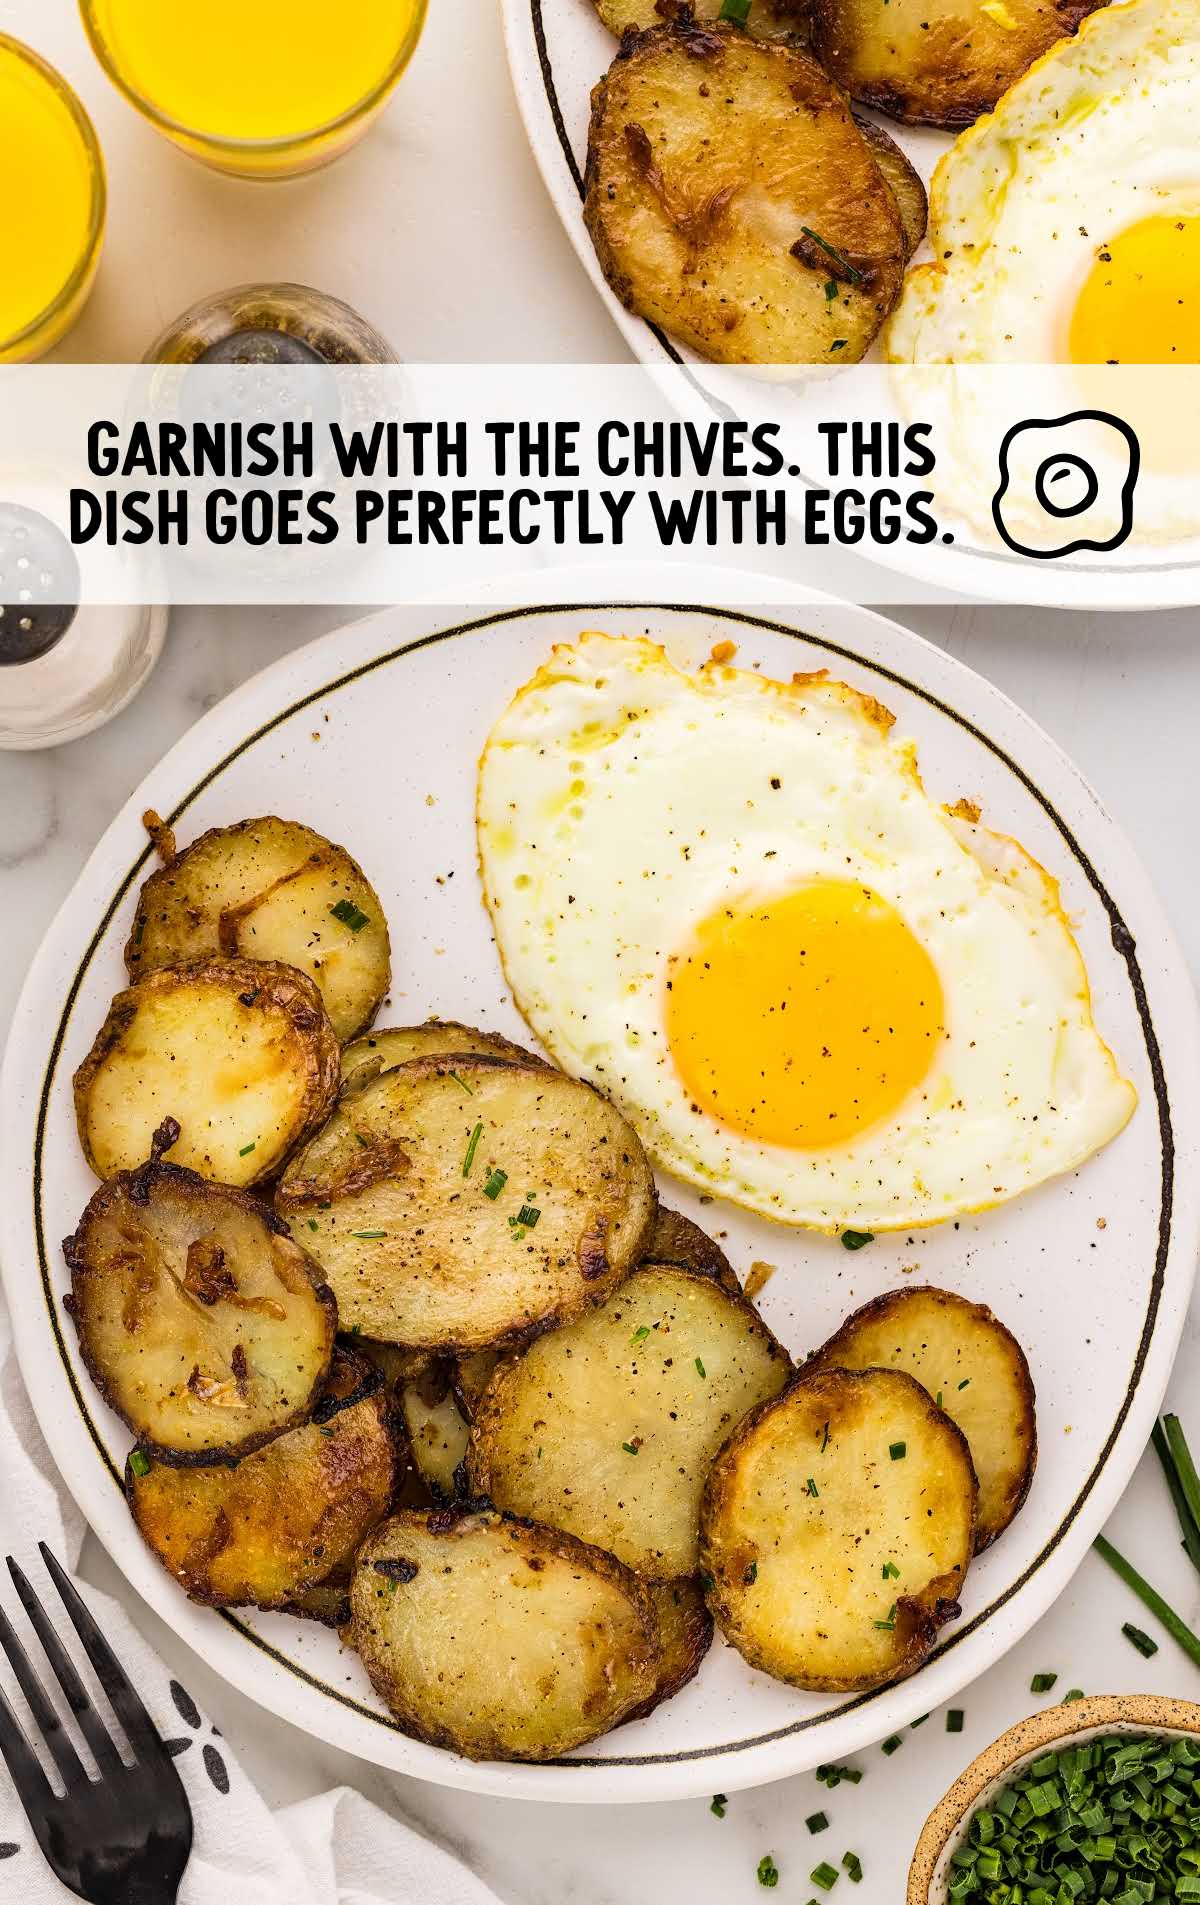 fried potatoes garnished with chives and served with eggs on a plate